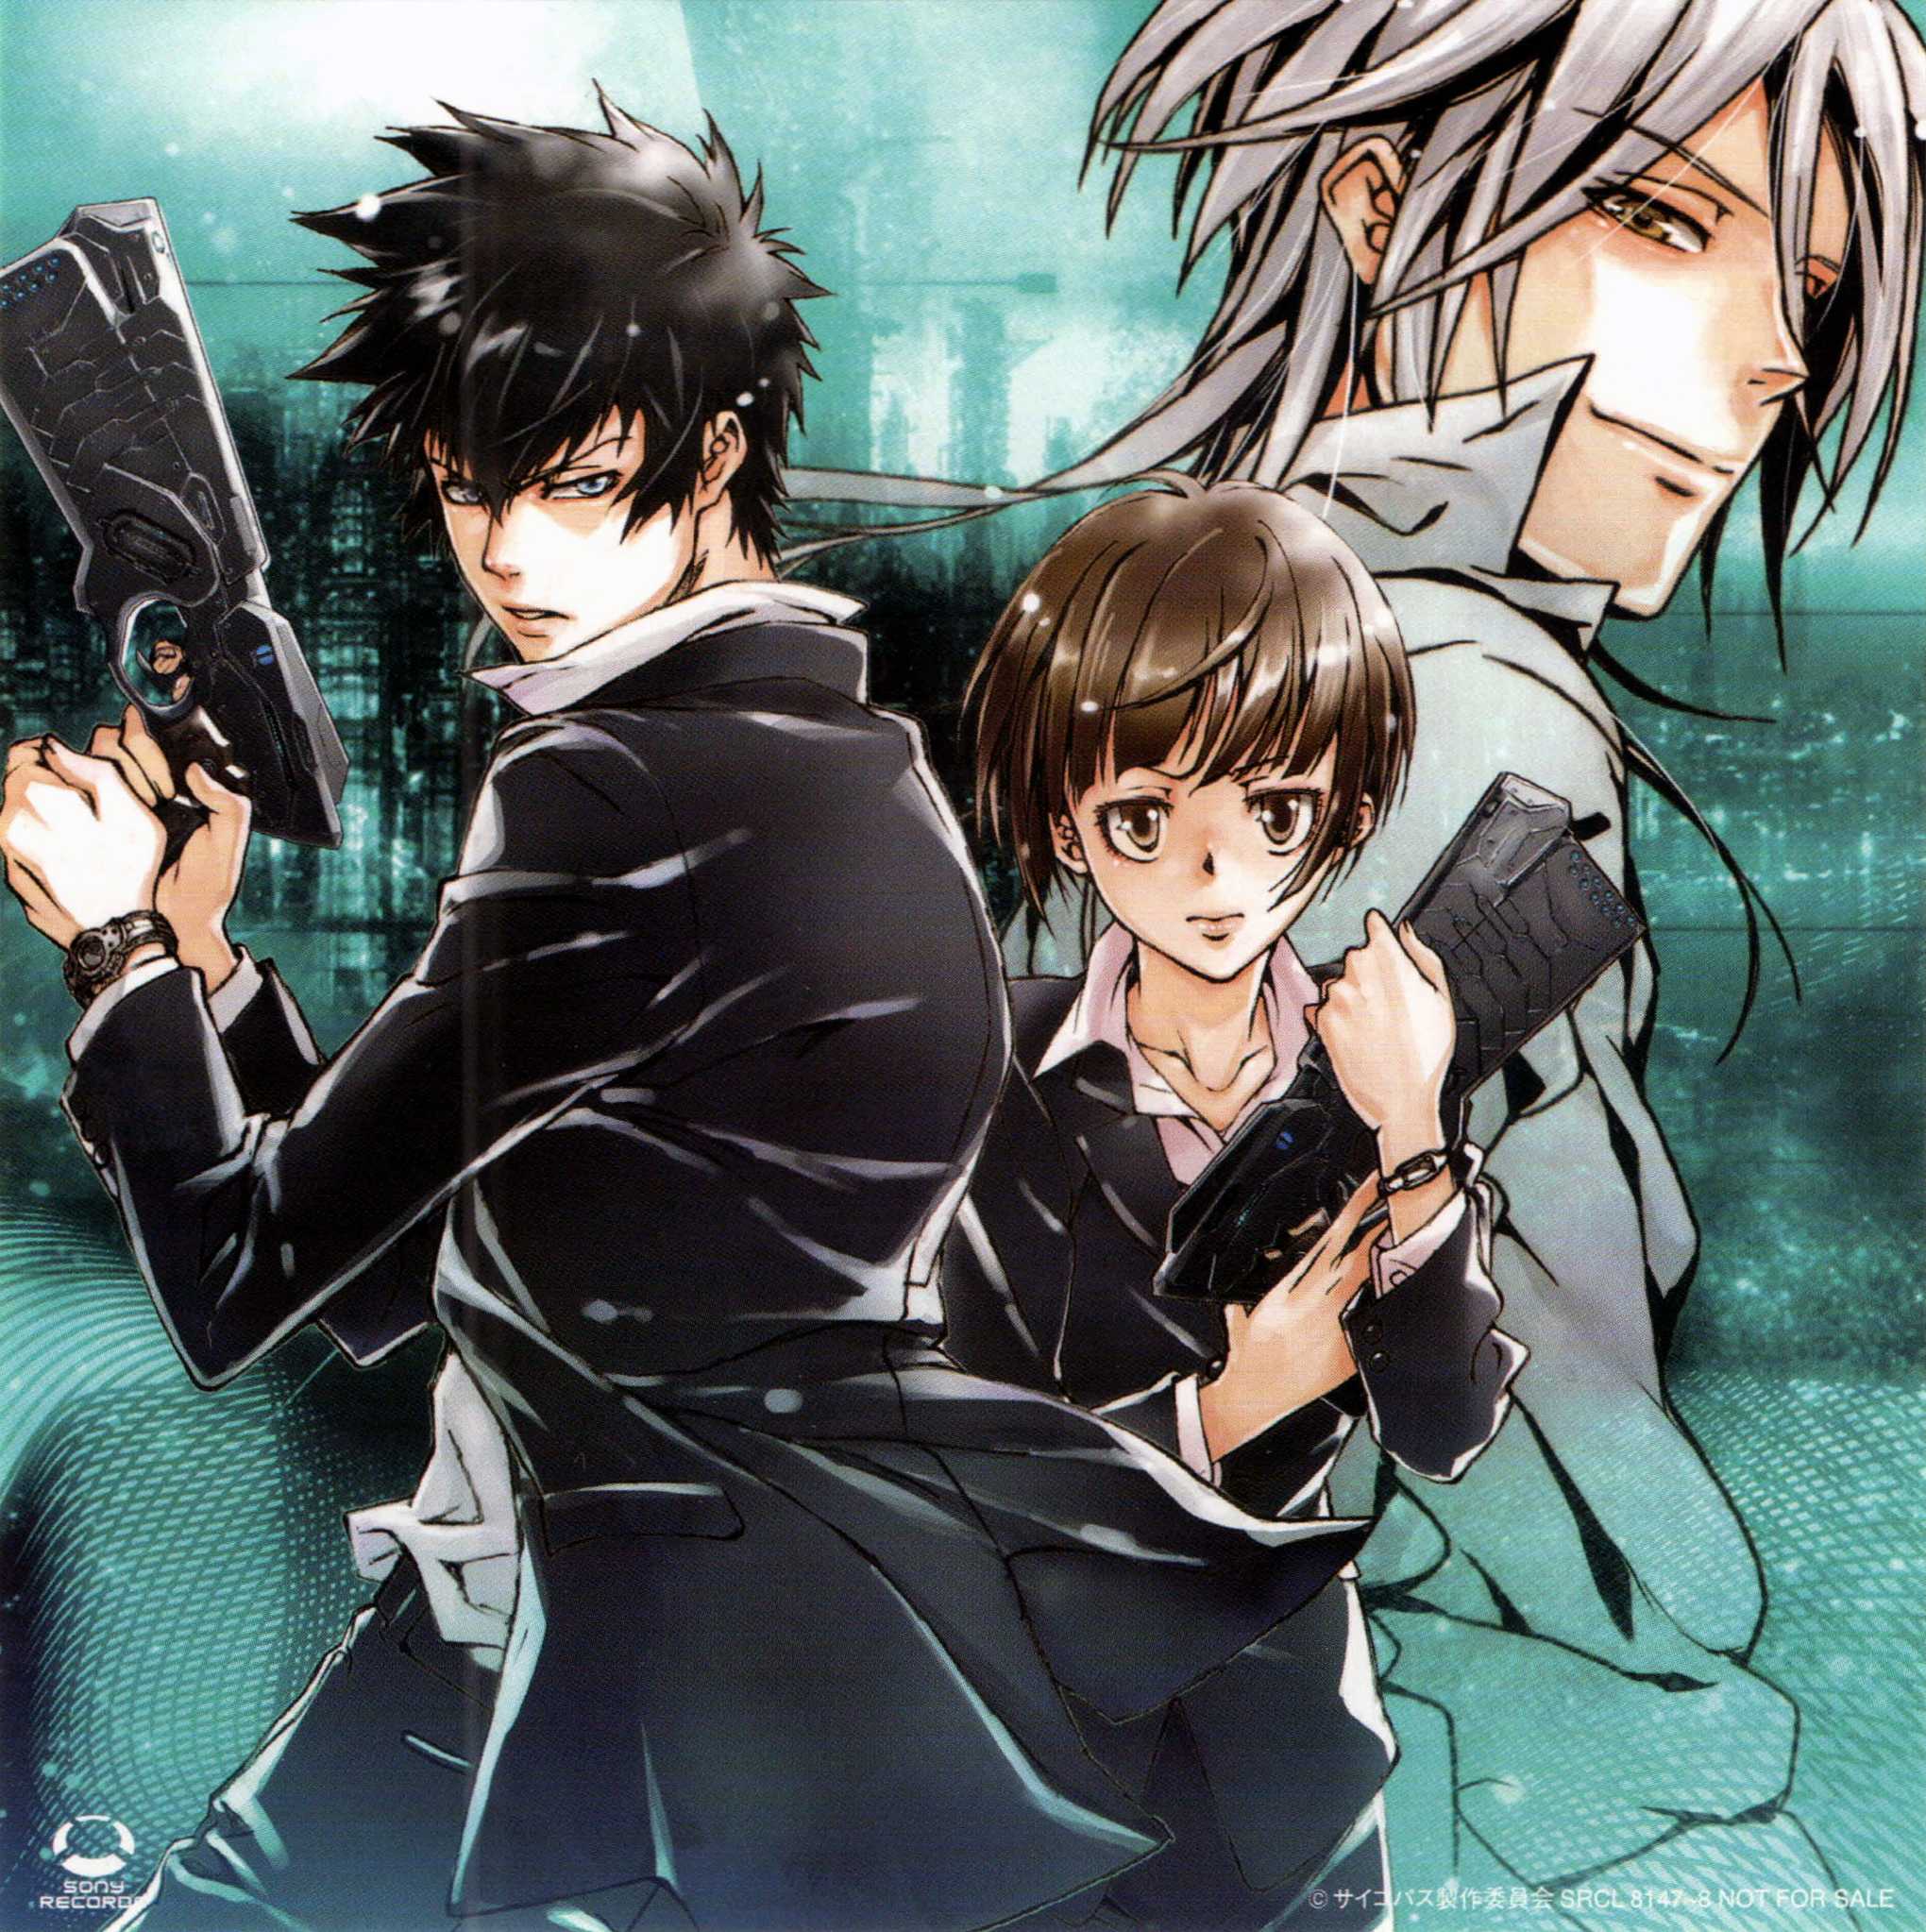 Psycho-Pass wallpapers, Anime, HQ Psycho-Pass pictures | 4K Wallpapers 2019